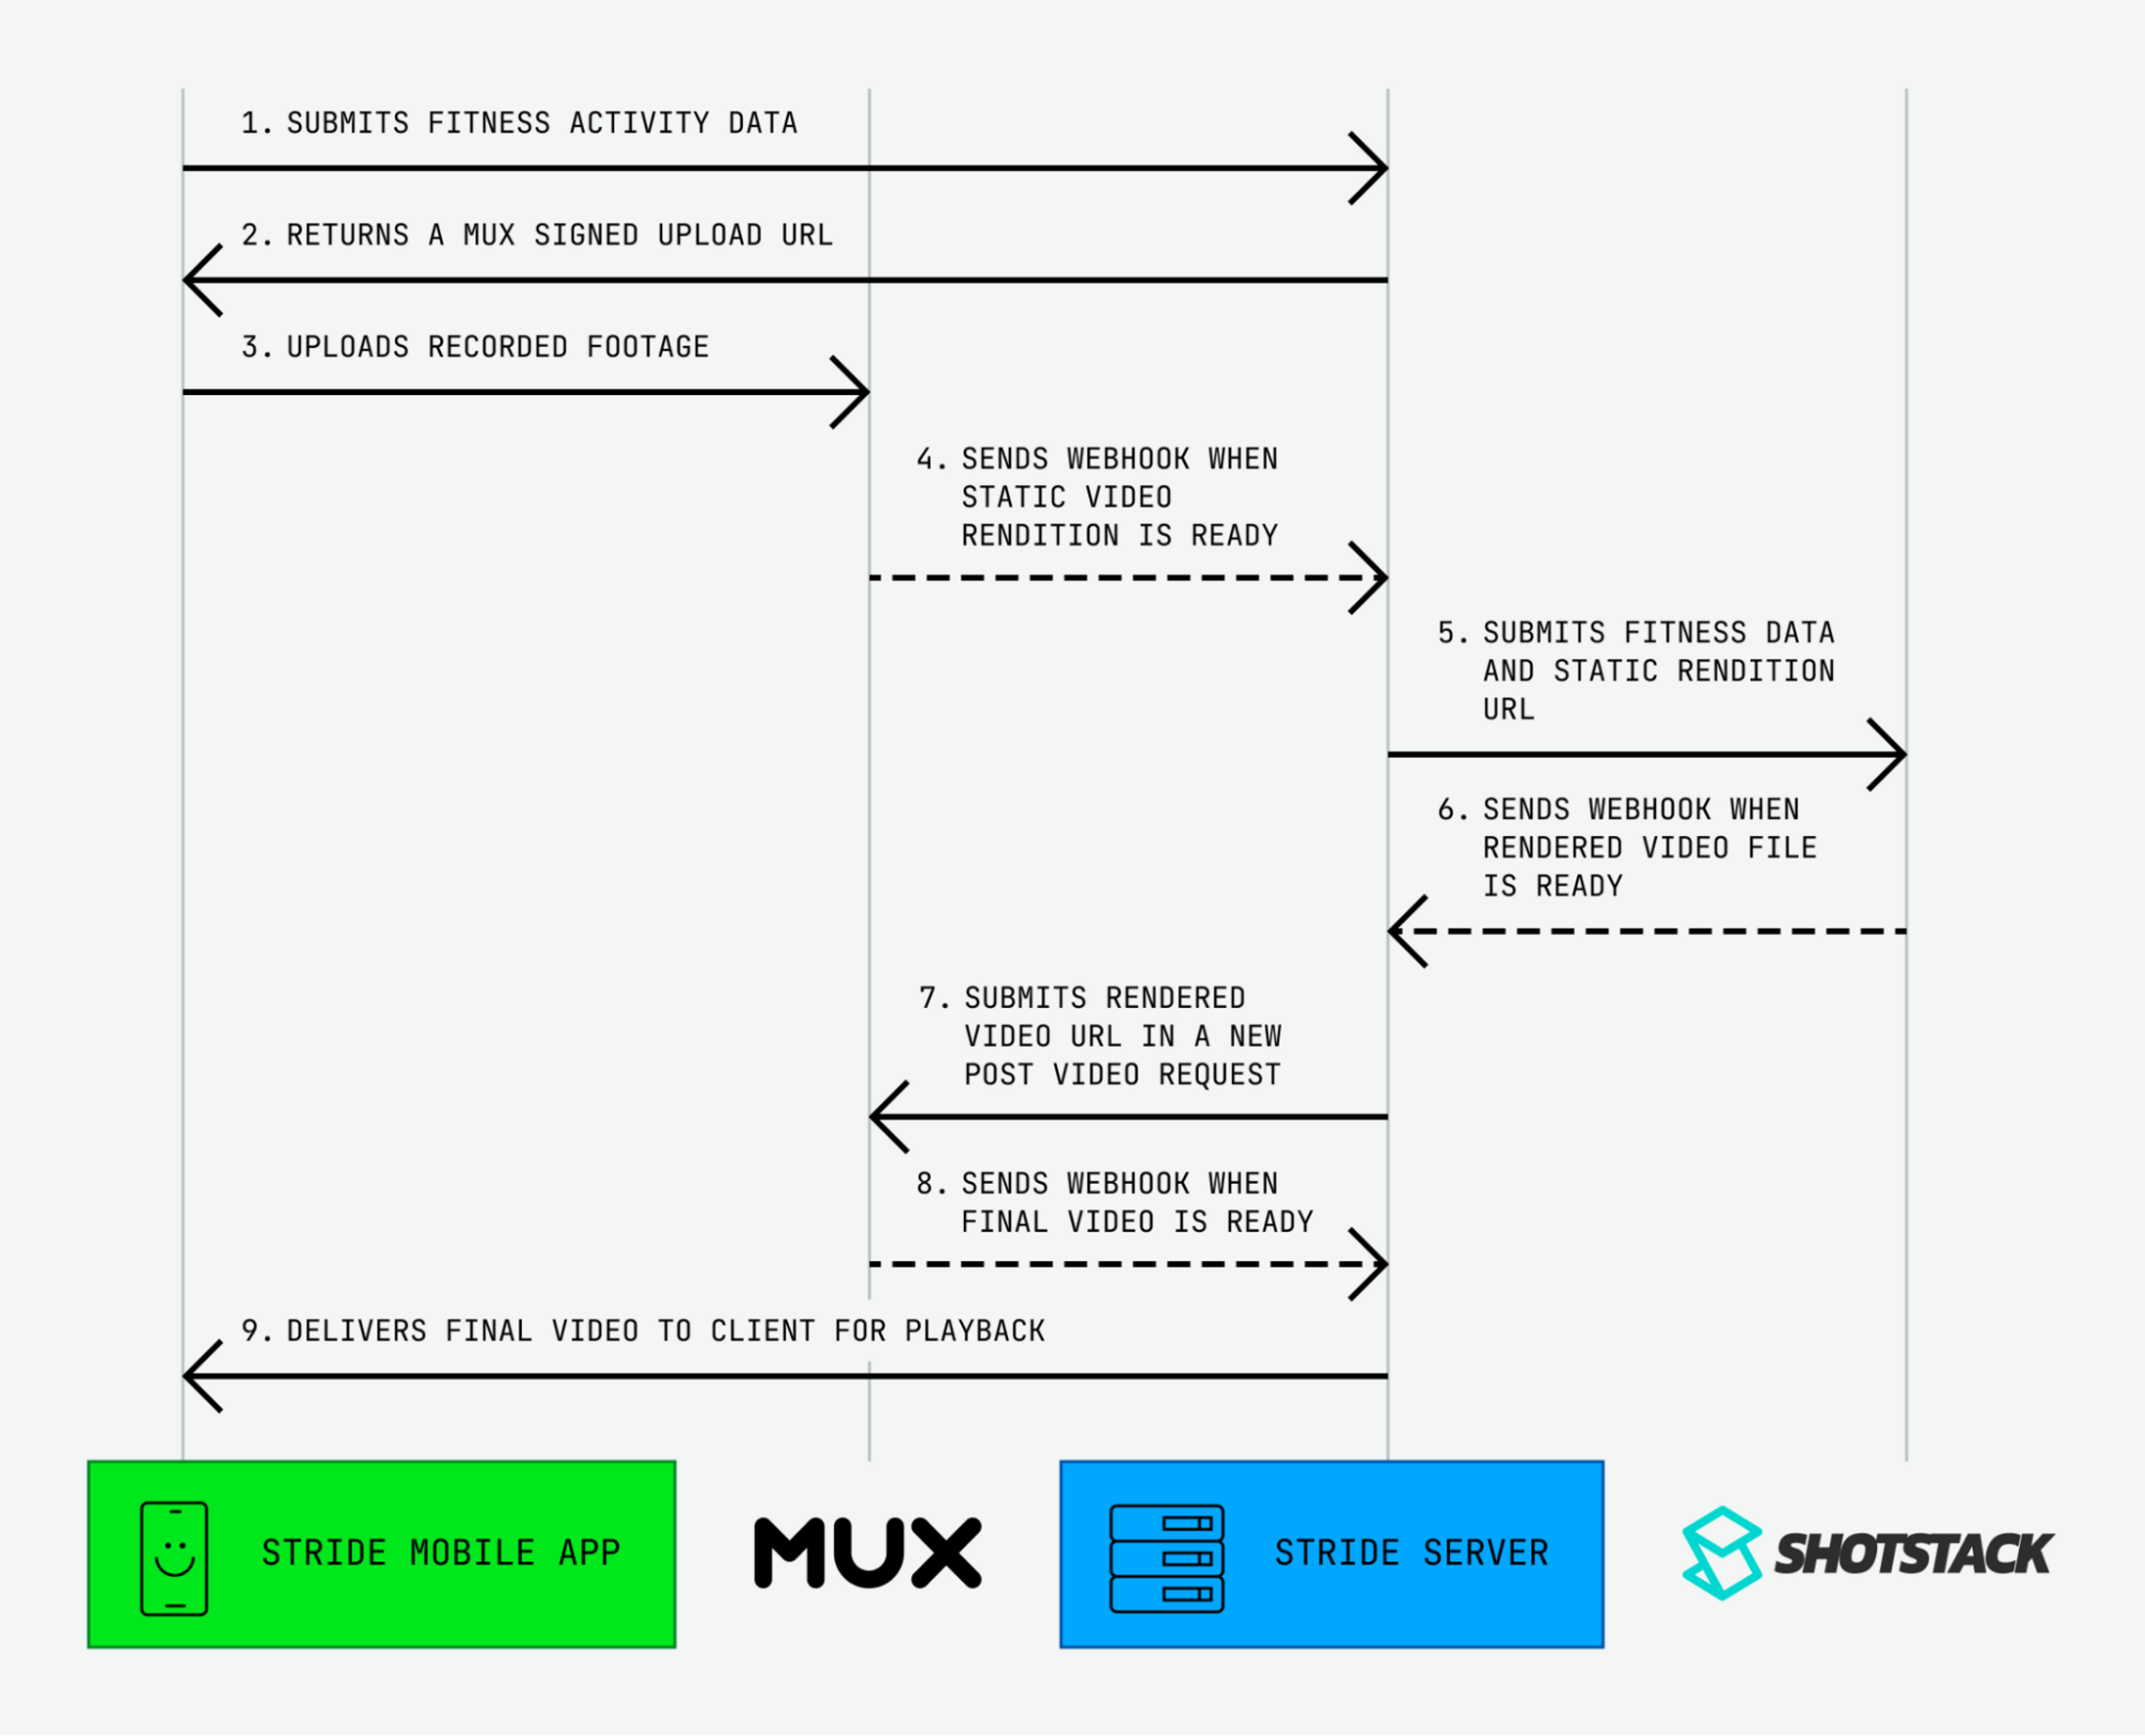 A sequence diagram showing the application workflow for uploading a video to Mux, sharing it with Shotstack to merge in the custom template, and retrieving the final playback URL.